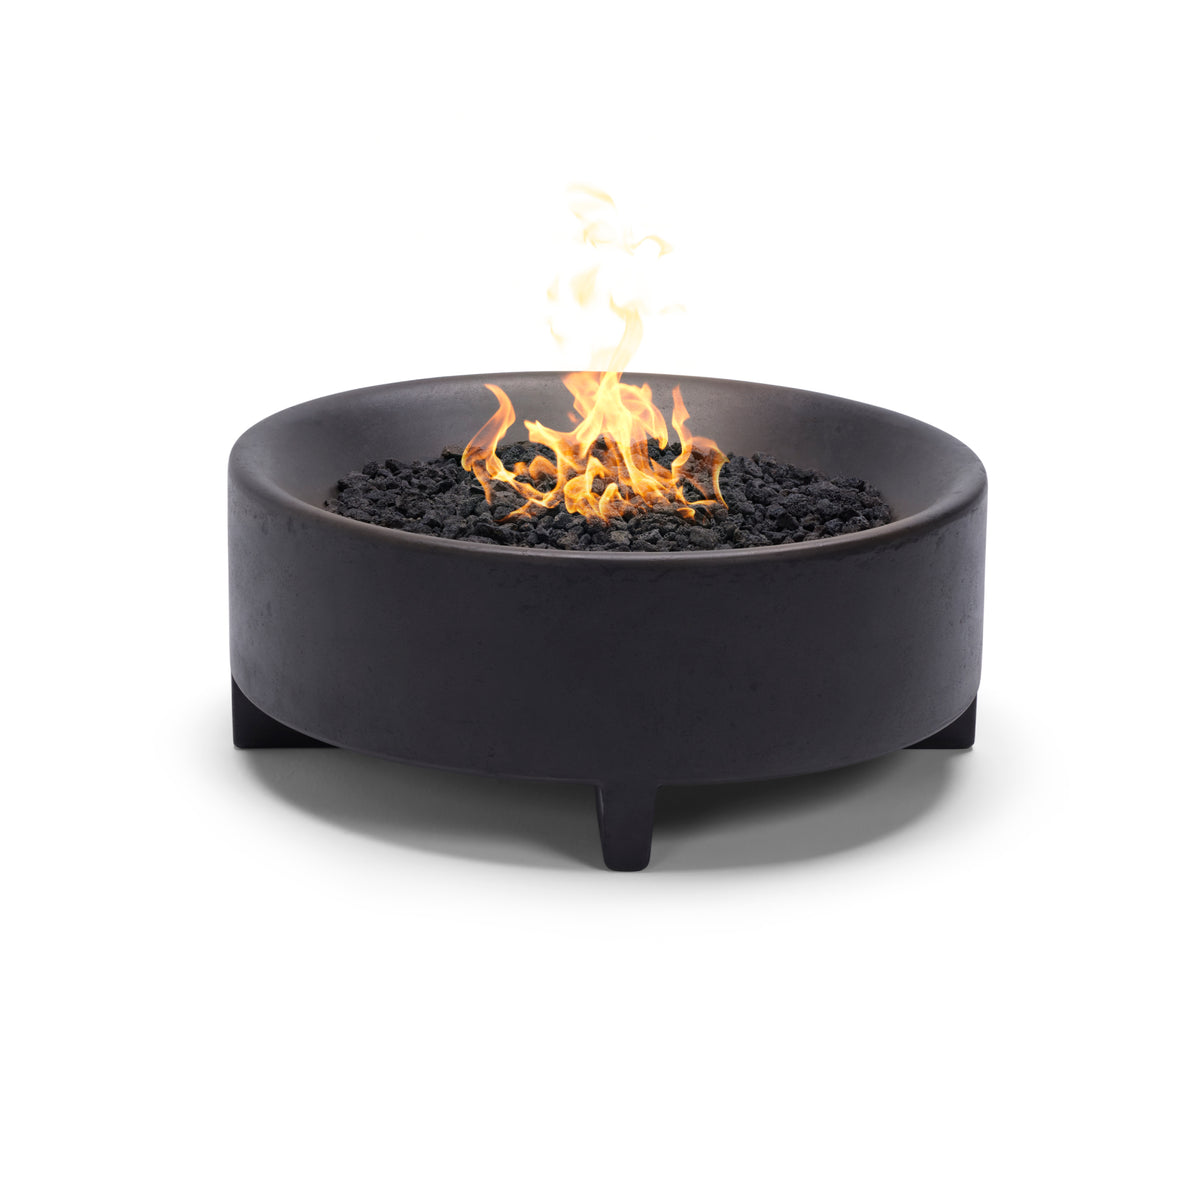 Rook Fire Table: A Concrete Fire Pit Table | Neighbor